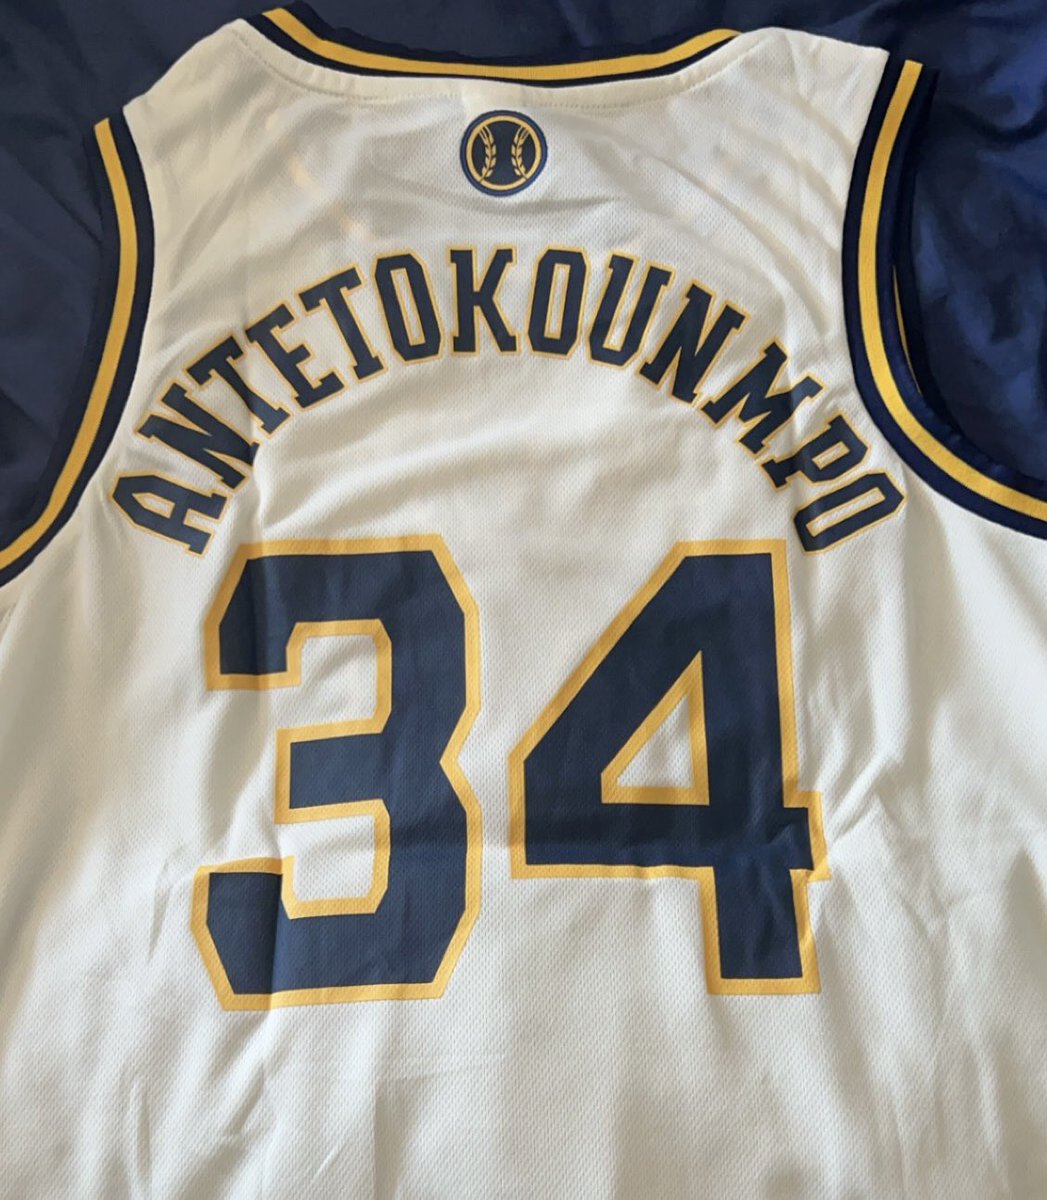 Giving away a Giannis Brewers jersey If you want it just retweet this tweet and be following me